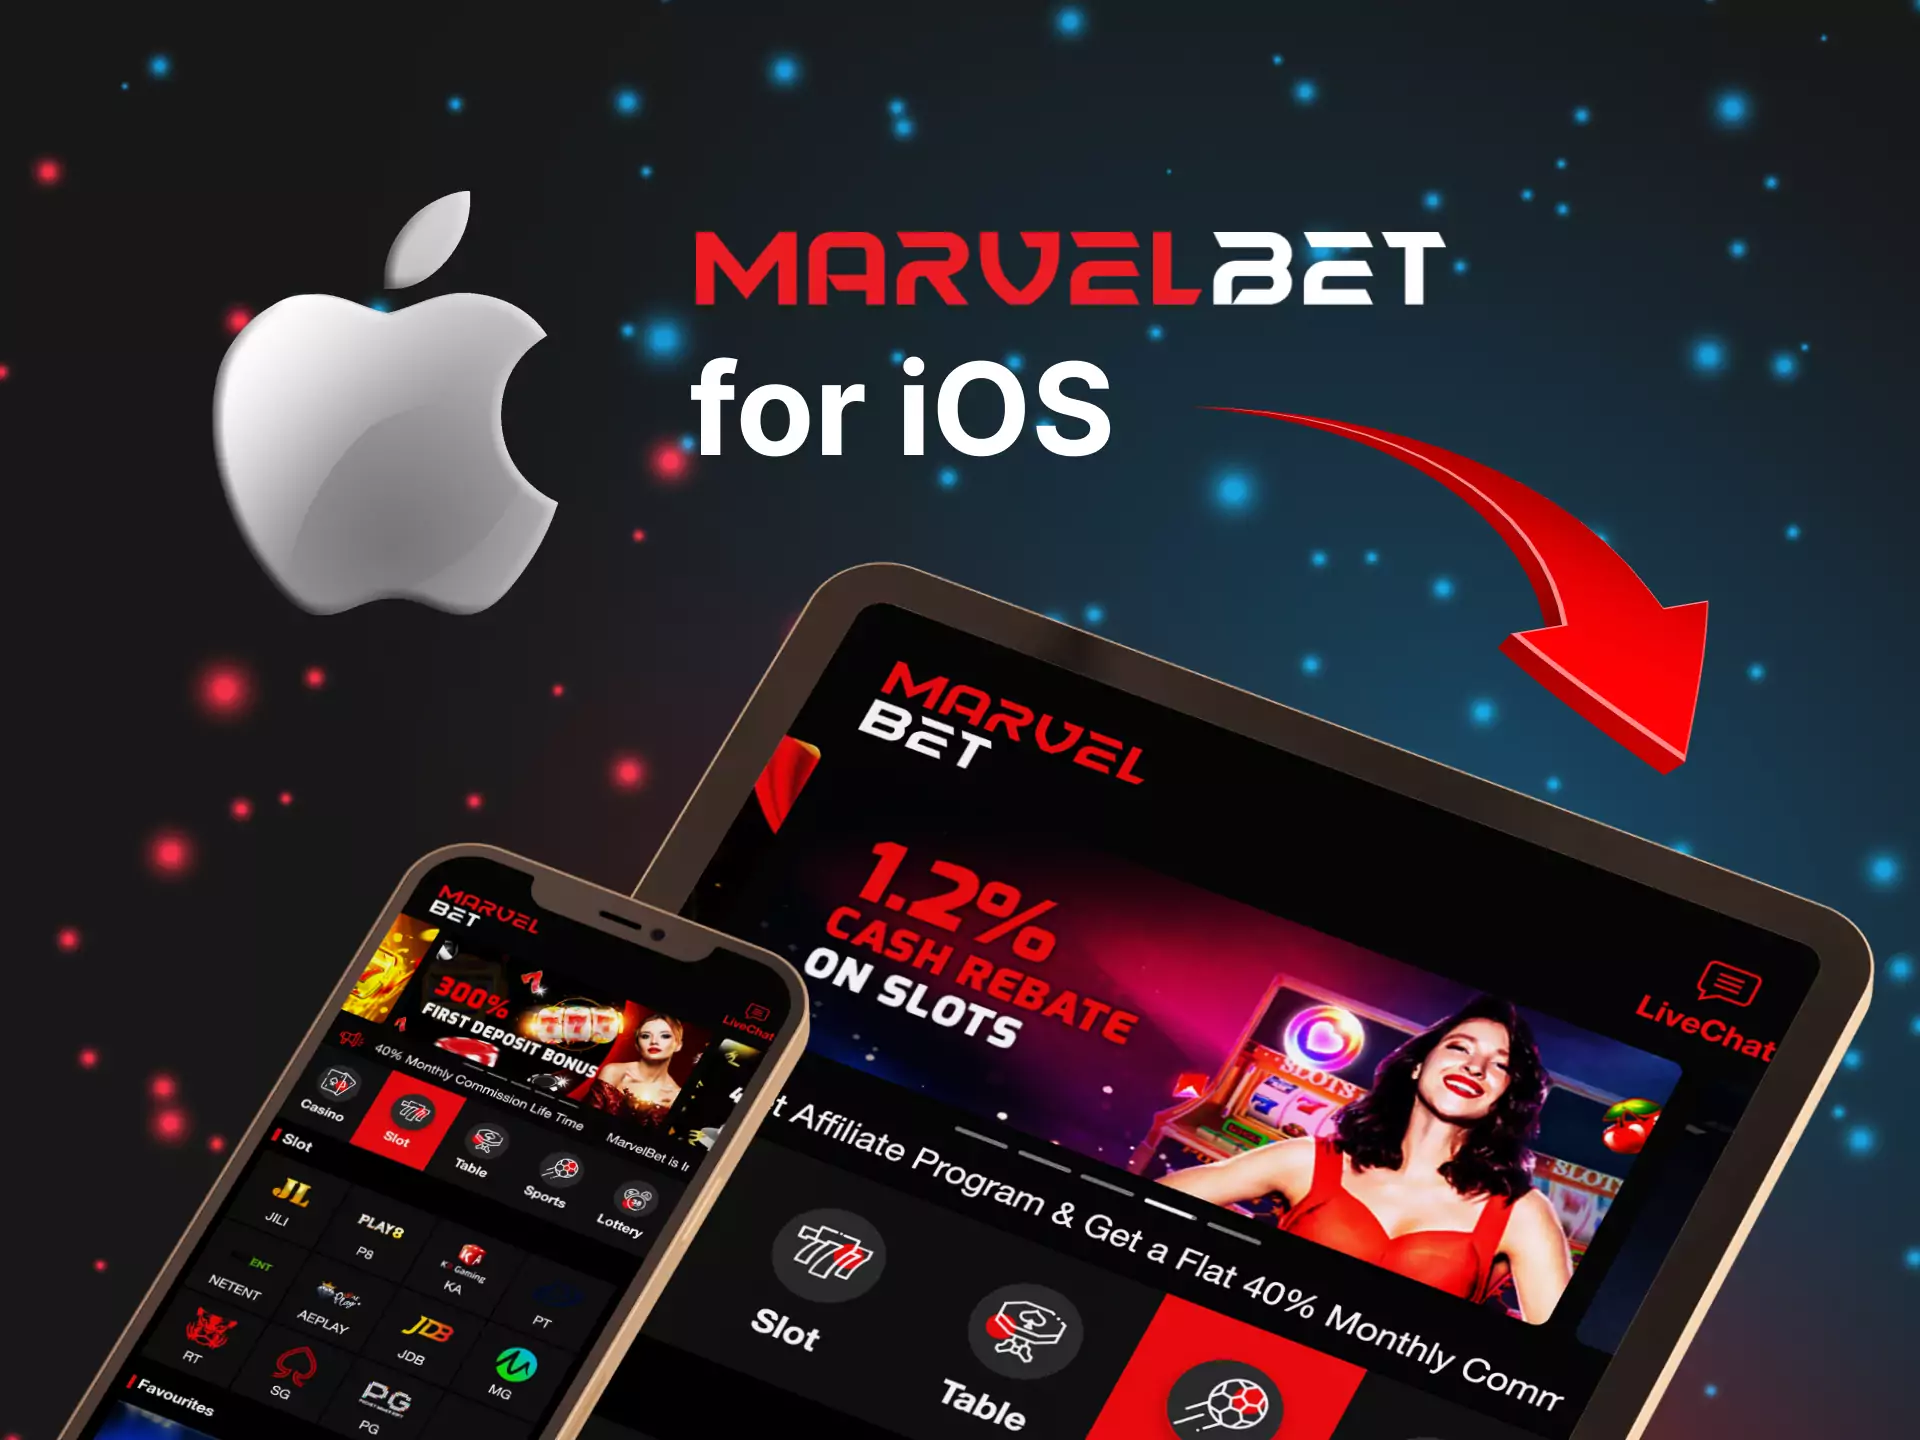 Follow the instructions to use Marvelbet on your iOS device.